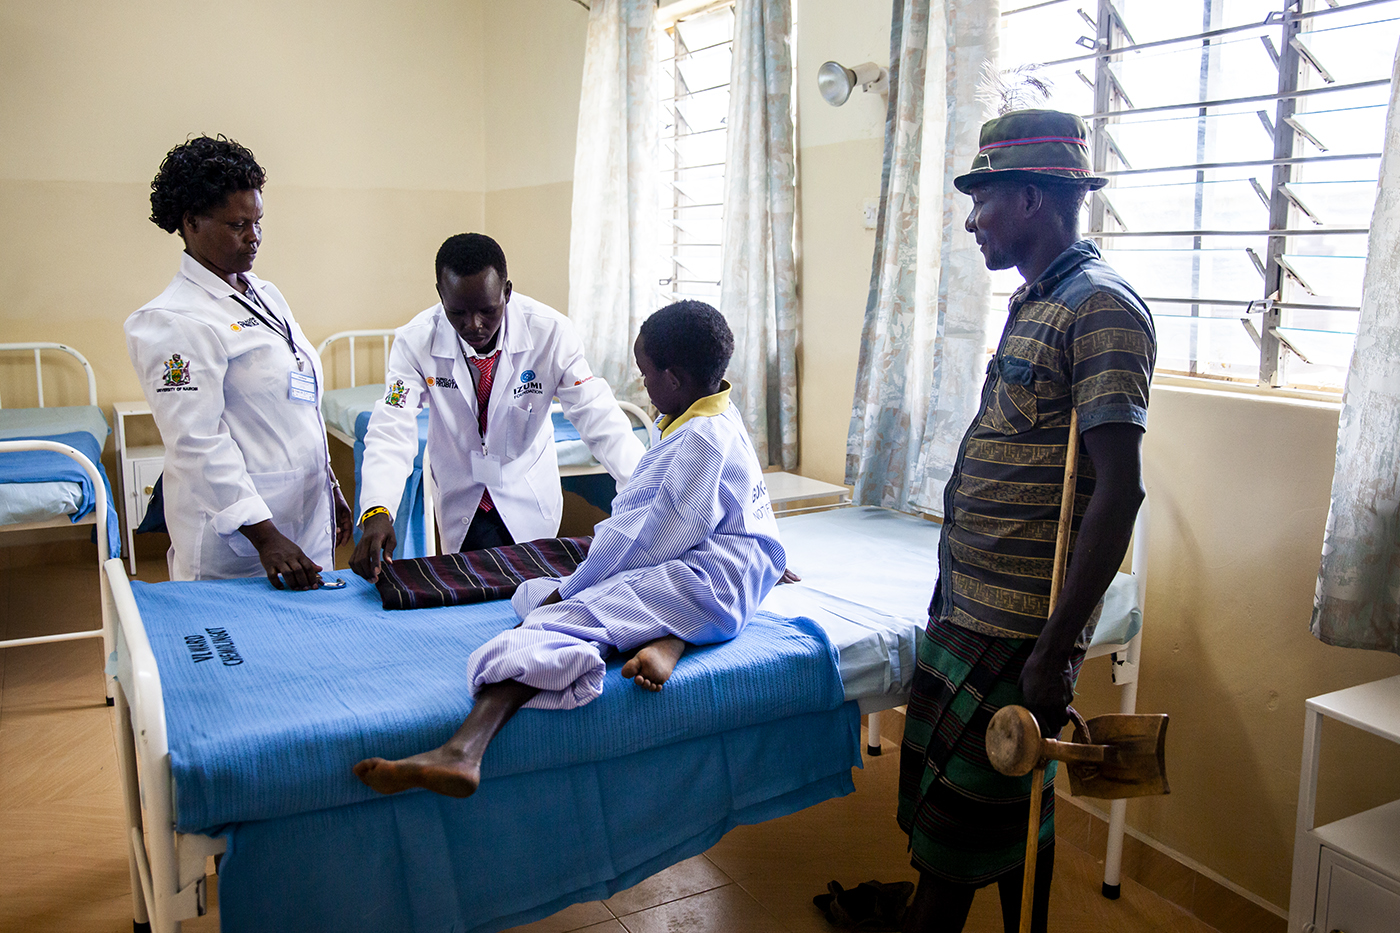 A nurse and pharmacist admit 10-year old Lopeto Losile to the new ward of the Chemolingot Sub-County Hospital. Losile’s father observes the process. Photo by Natalia Jidovanu for Northeastern University